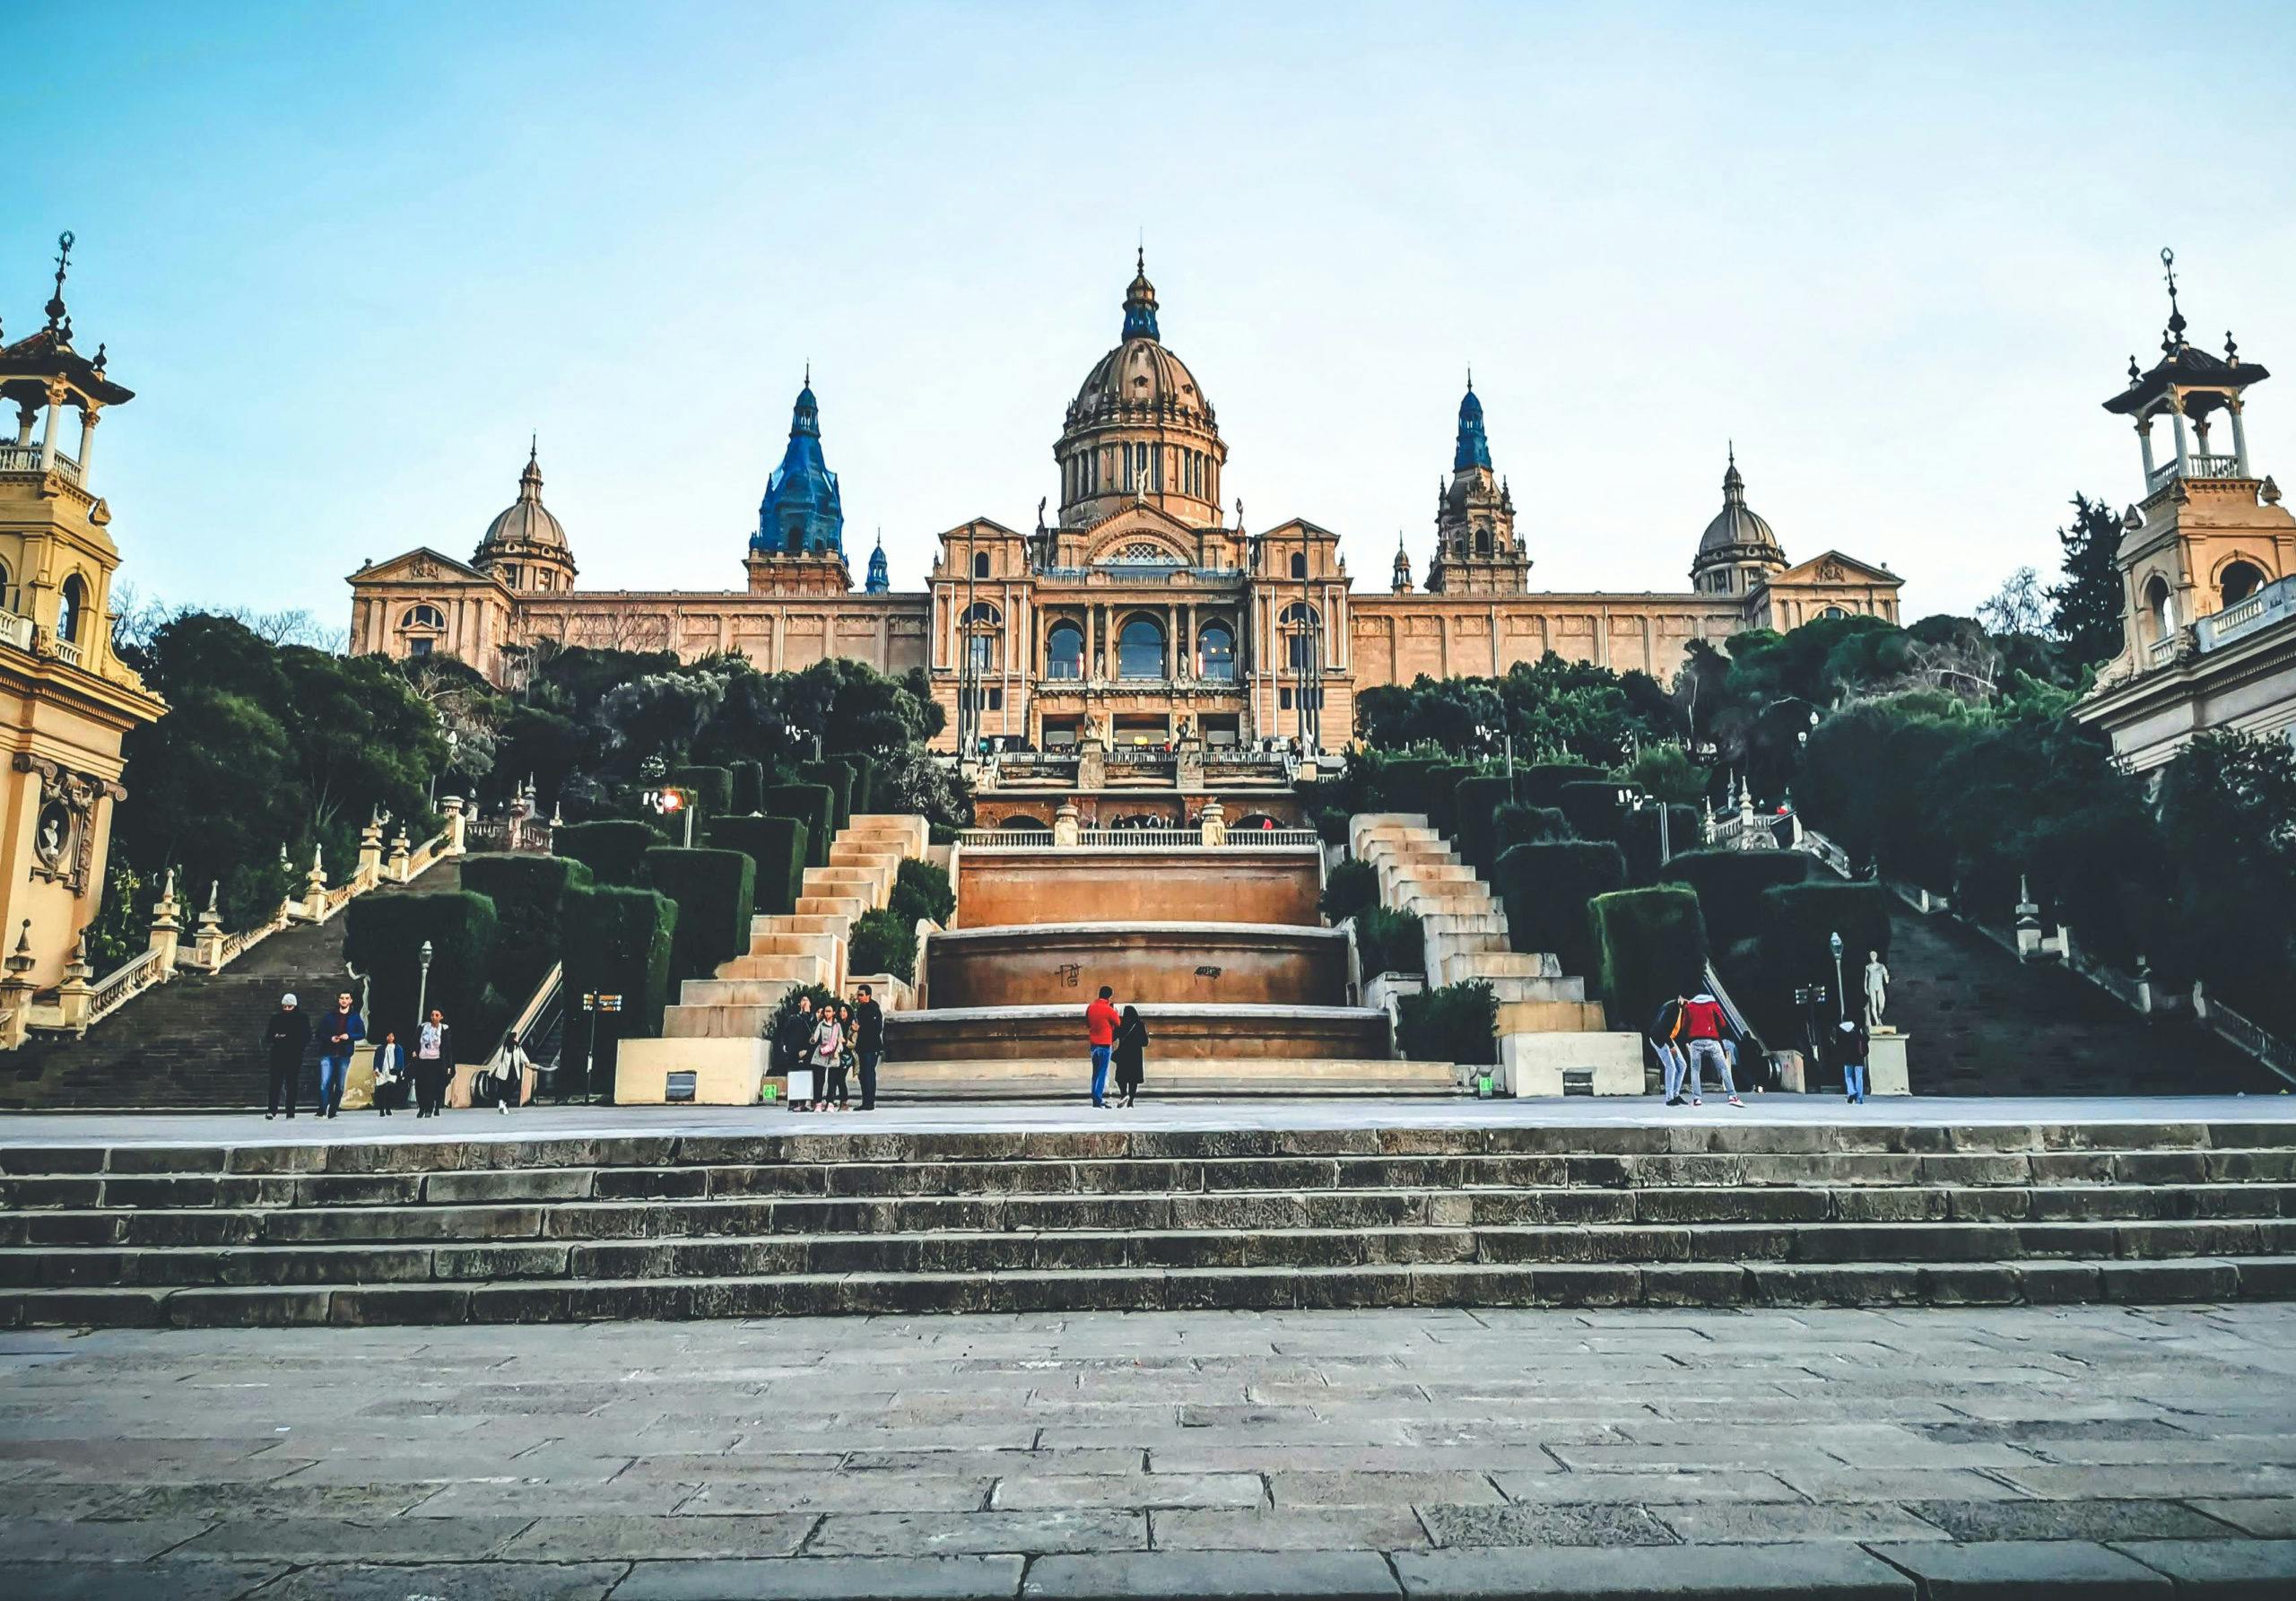 A beautiful dome-shaped palace in Barcelona, Spain